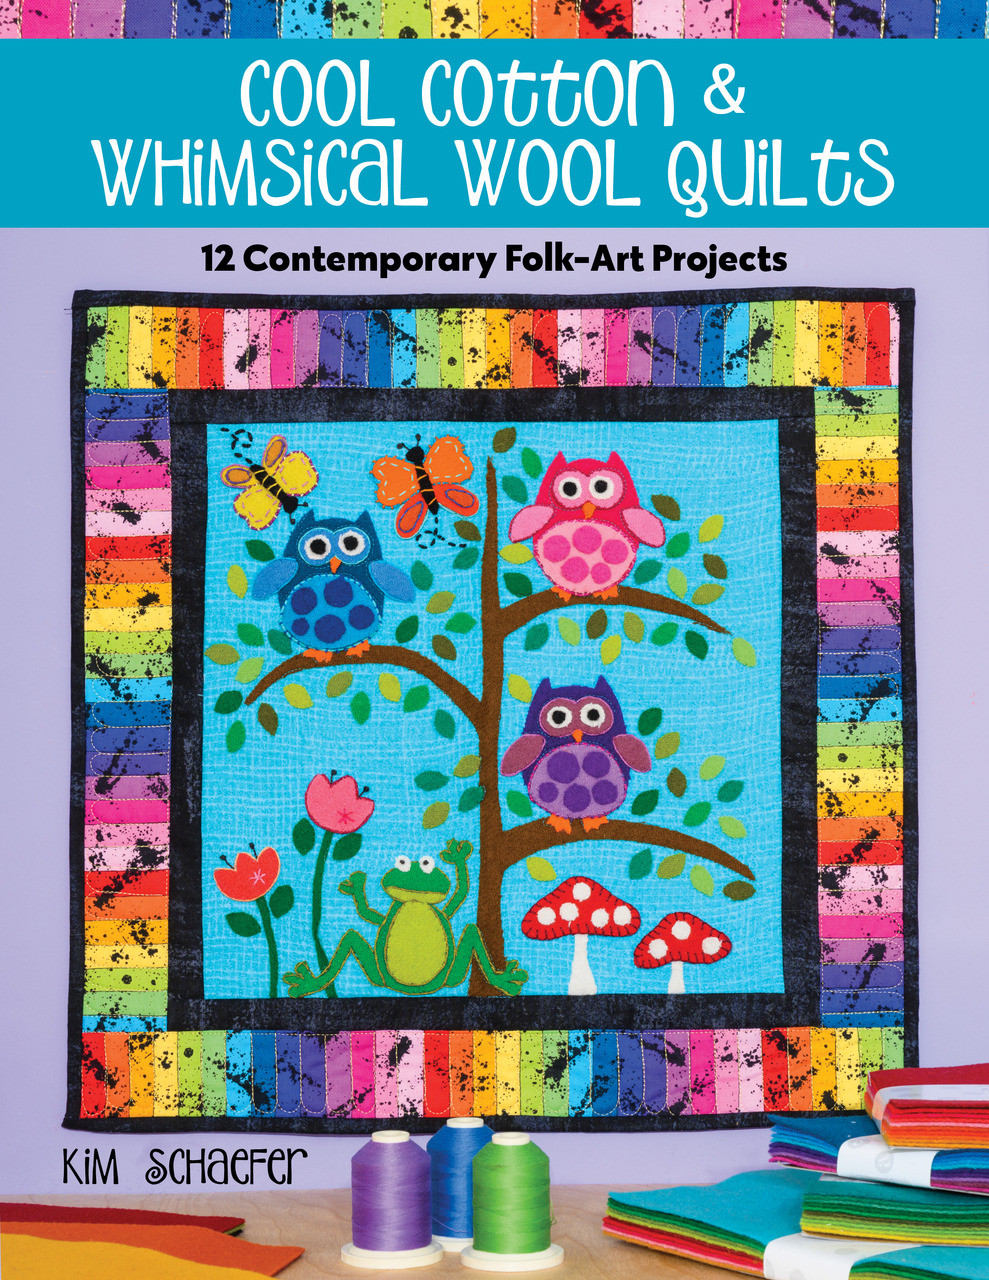 Free Wool Appliqué Patterns  Wool quilts patterns, Wool applique patterns,  Wool quilts